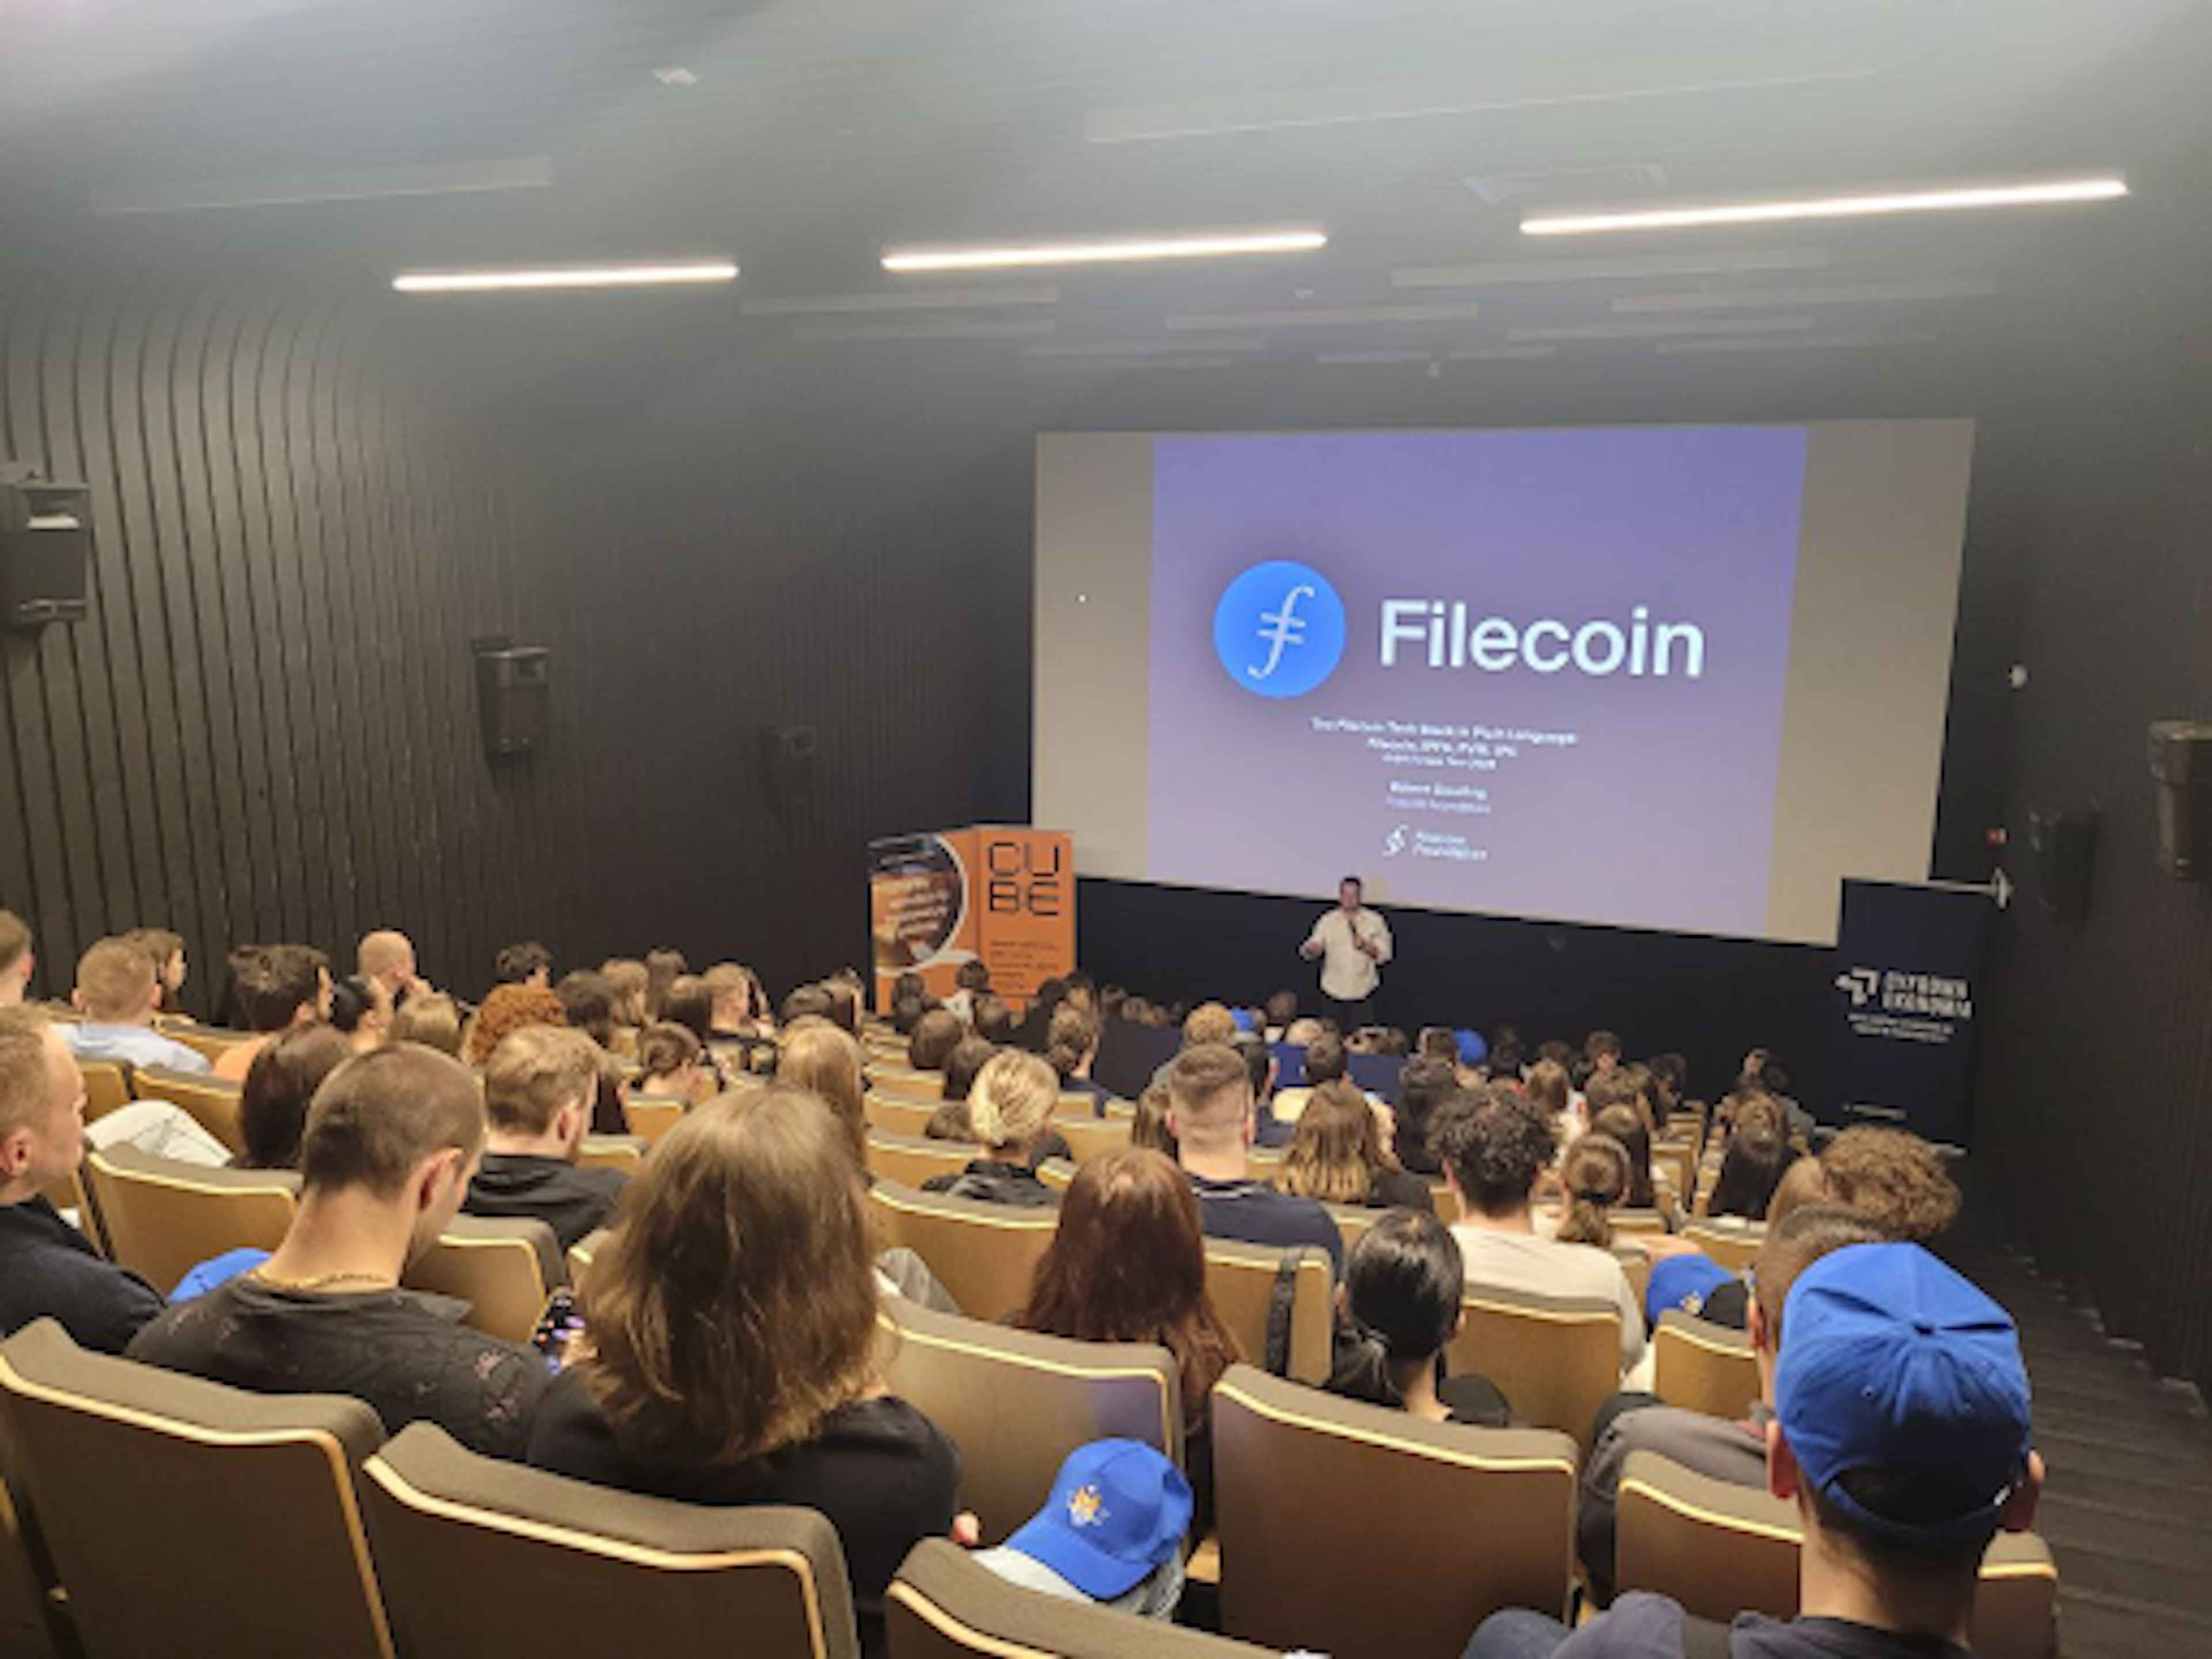 A person is giving a presentation on Filecoin to an audience in a lecture hall, with a slide displaying the Filecoin logo and title.